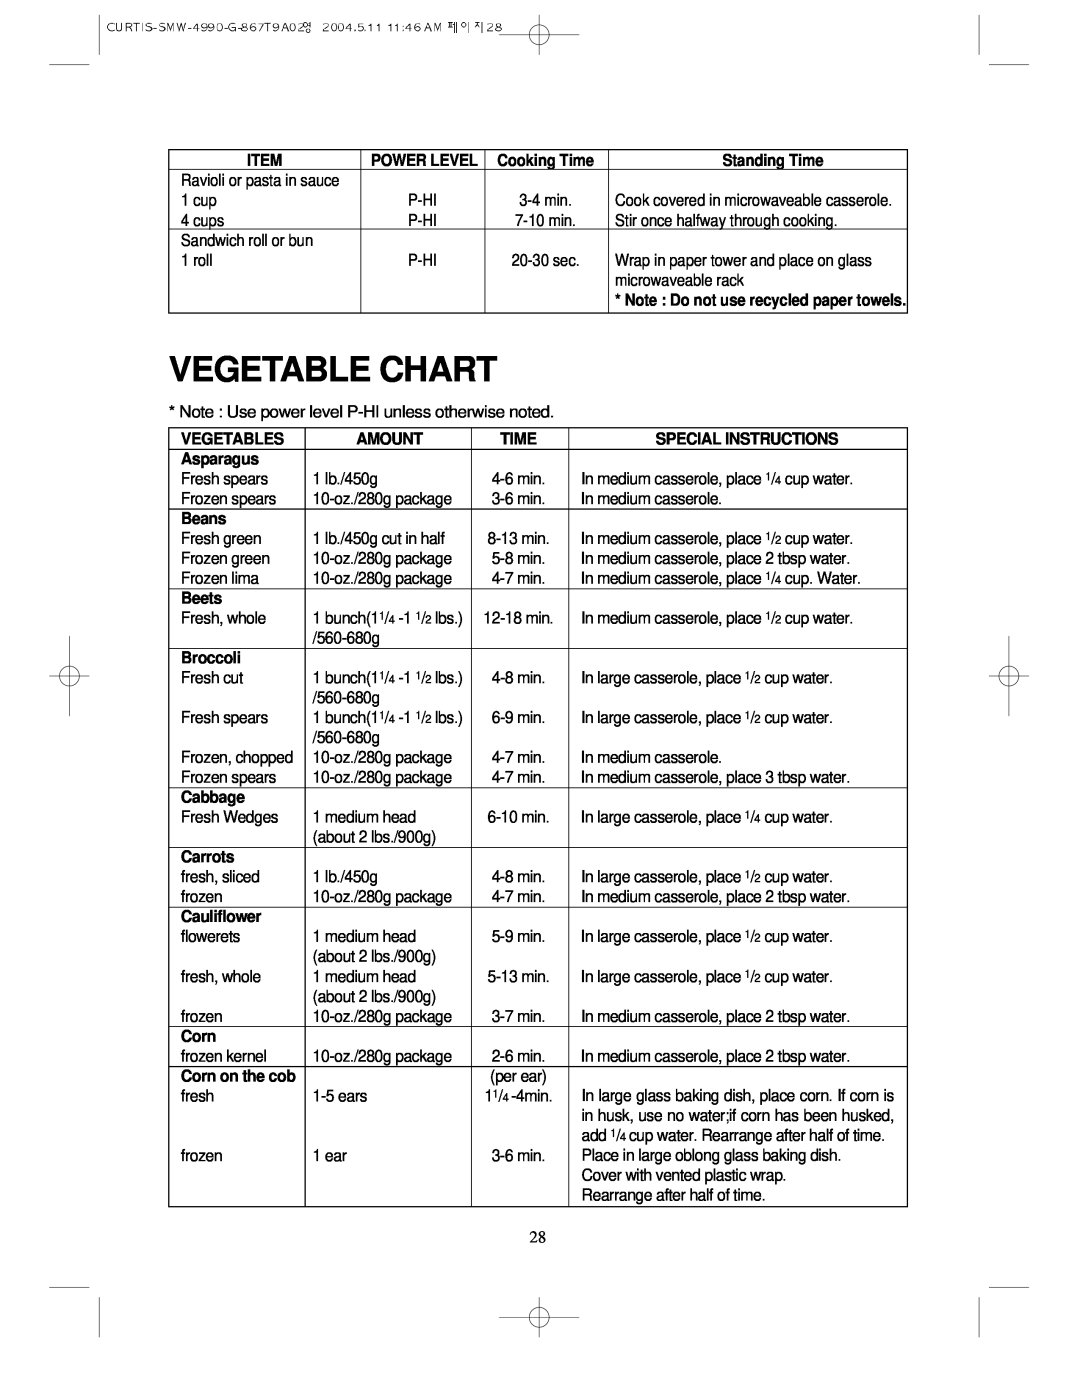 Sunbeam SMW-4990 Vegetable Chart, Standing Time, Vegetables, Amount, Special Instructions, Asparagus, Beans, Beets, Corn 